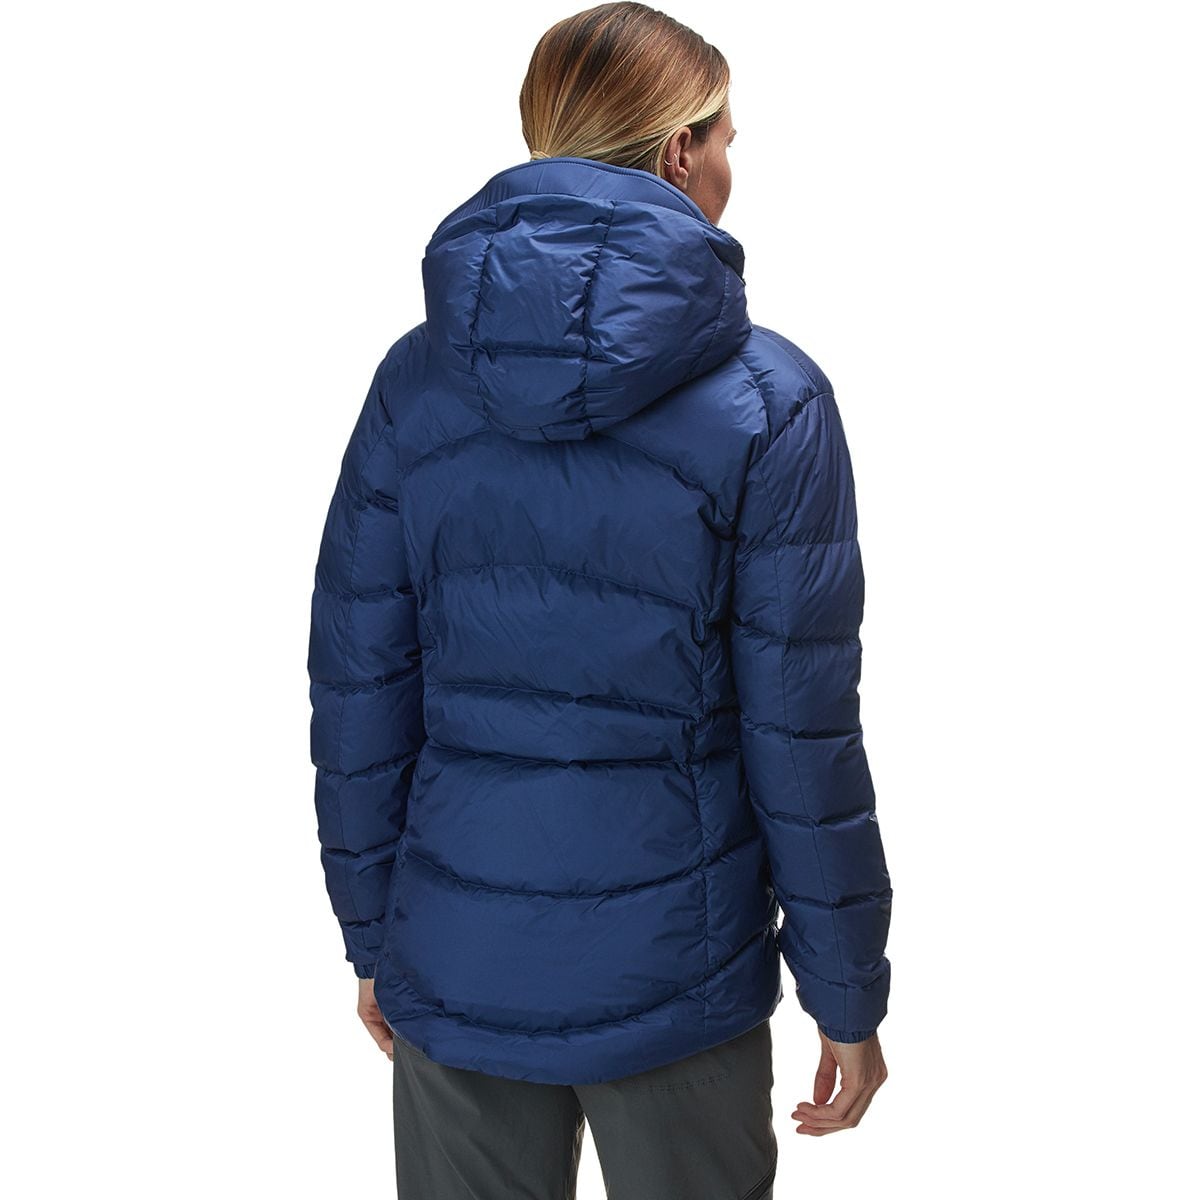 Rab Ascent Down Jacket - Women's | Backcountry.com